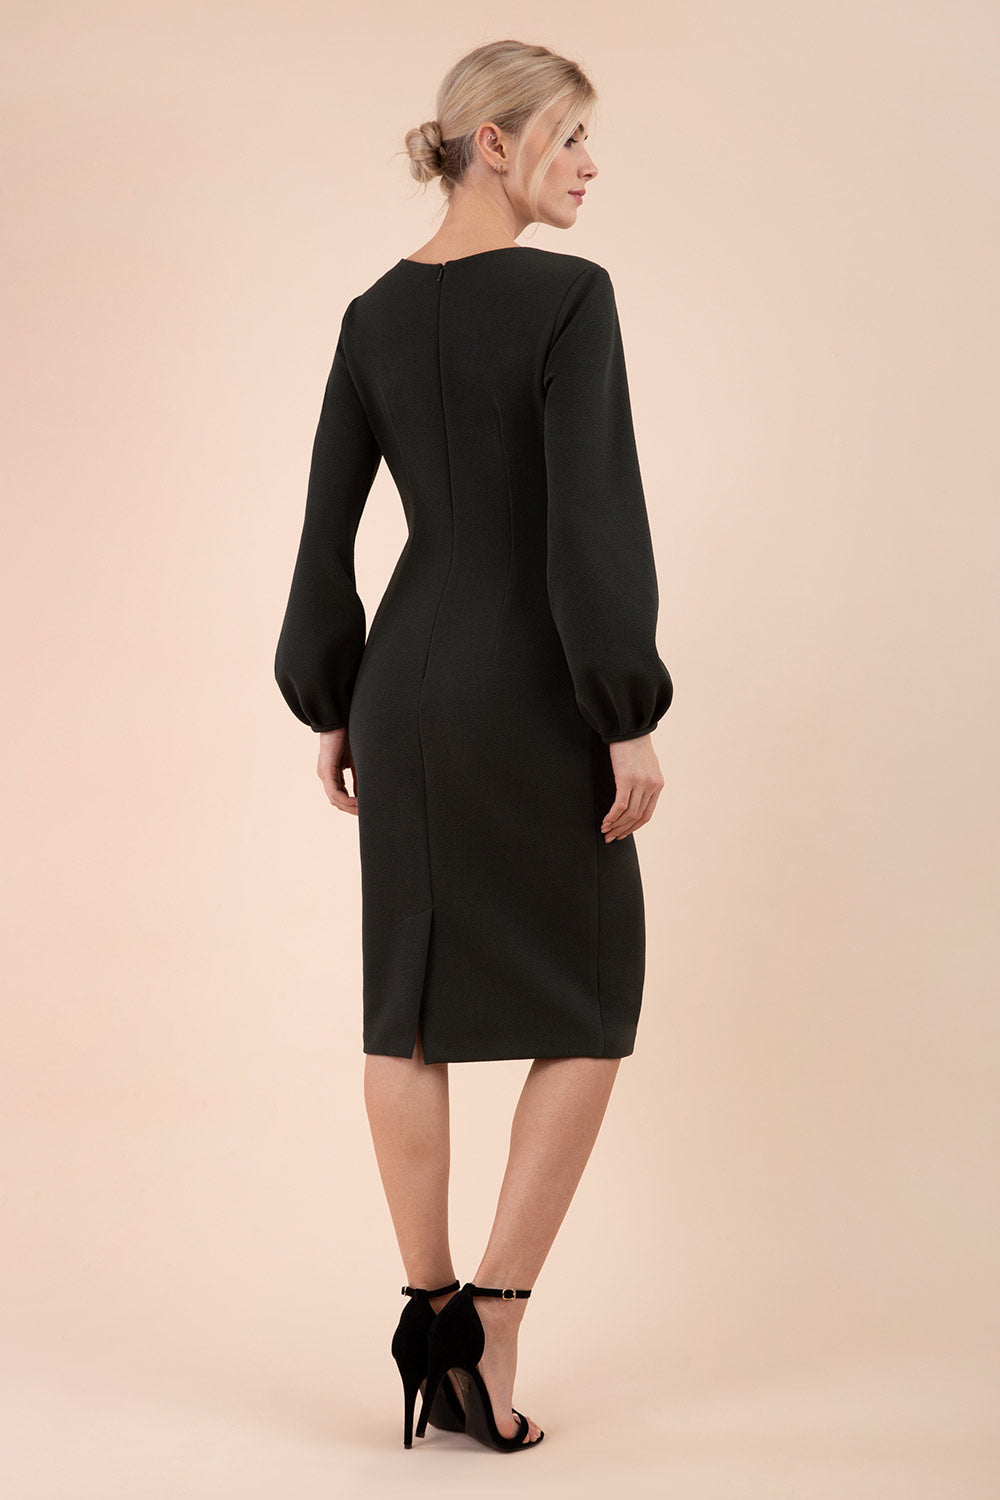 Blonde model wearing Diva Catwalk Praktica long puffed bishop sleeves knee length empire line pencil dress with round neckline with a slit cut in the middle in Deep Green back